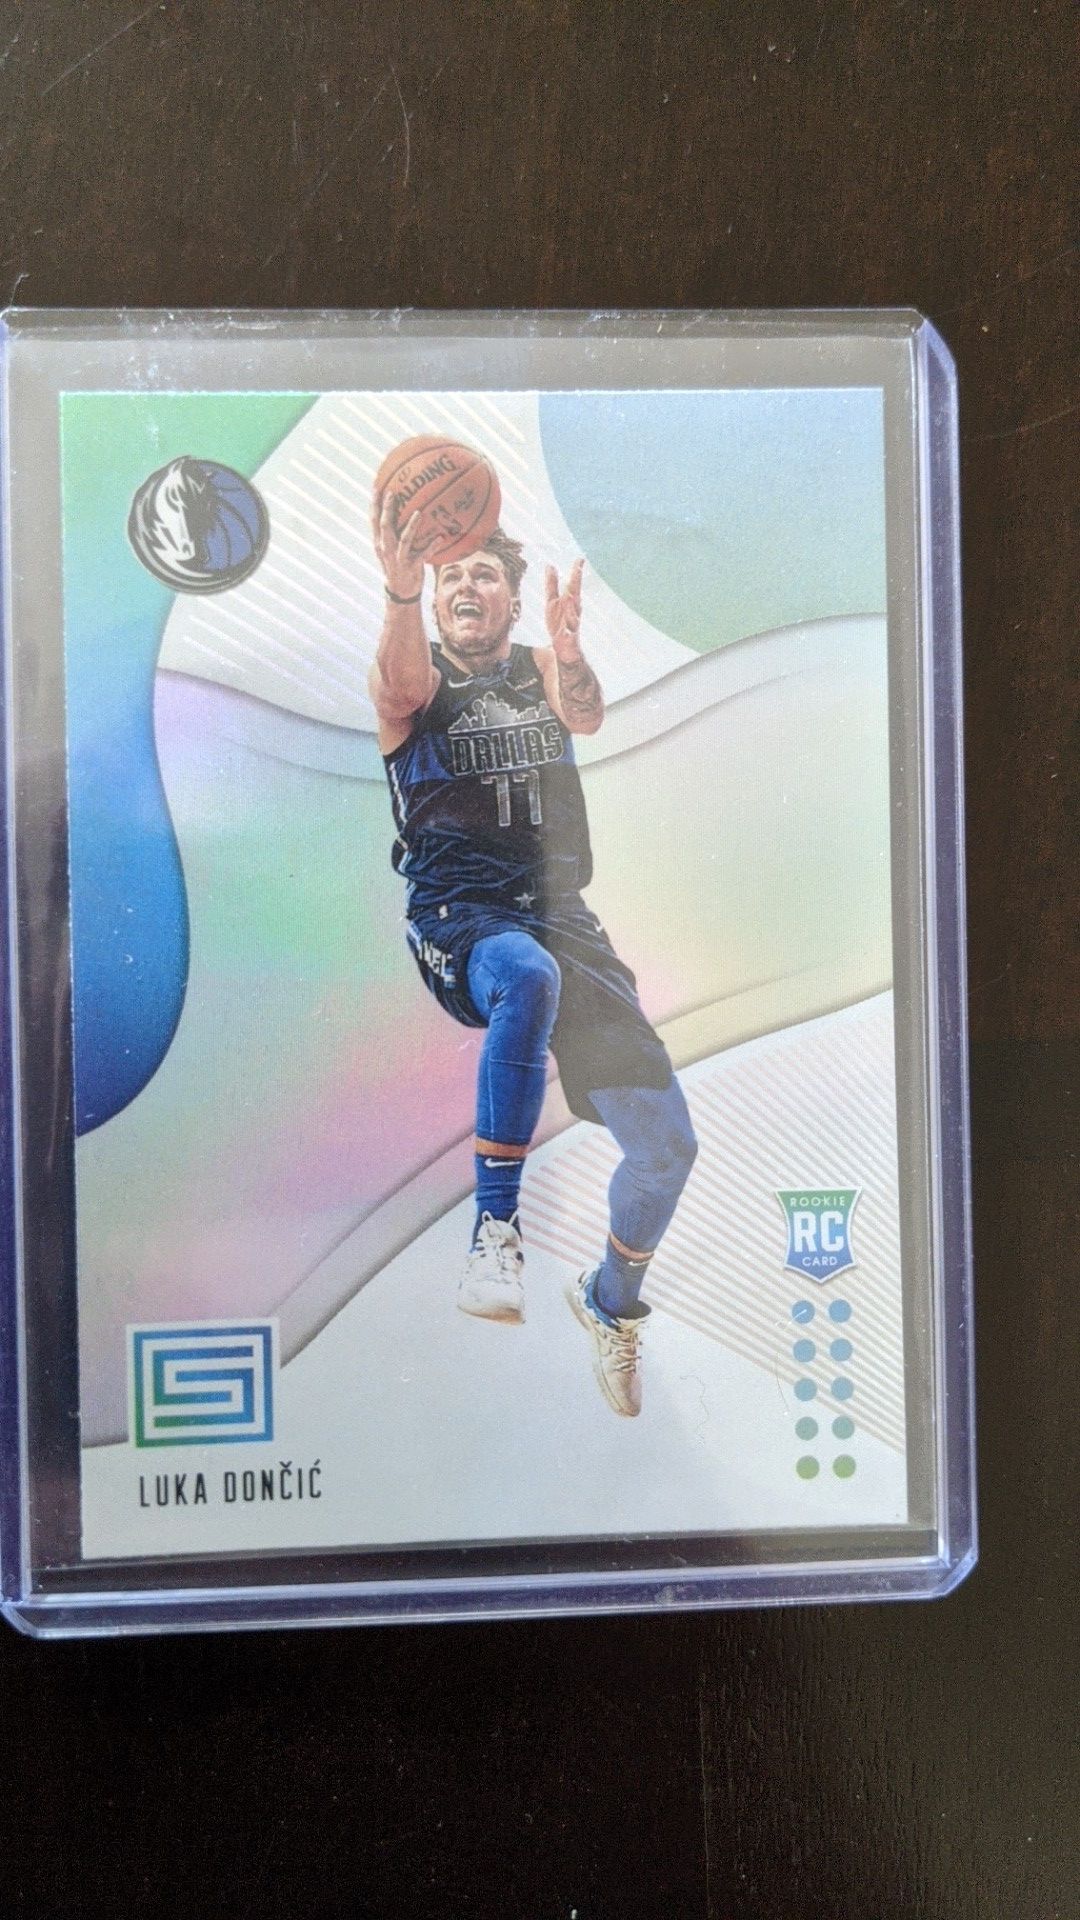 Luka Doncic rookie card